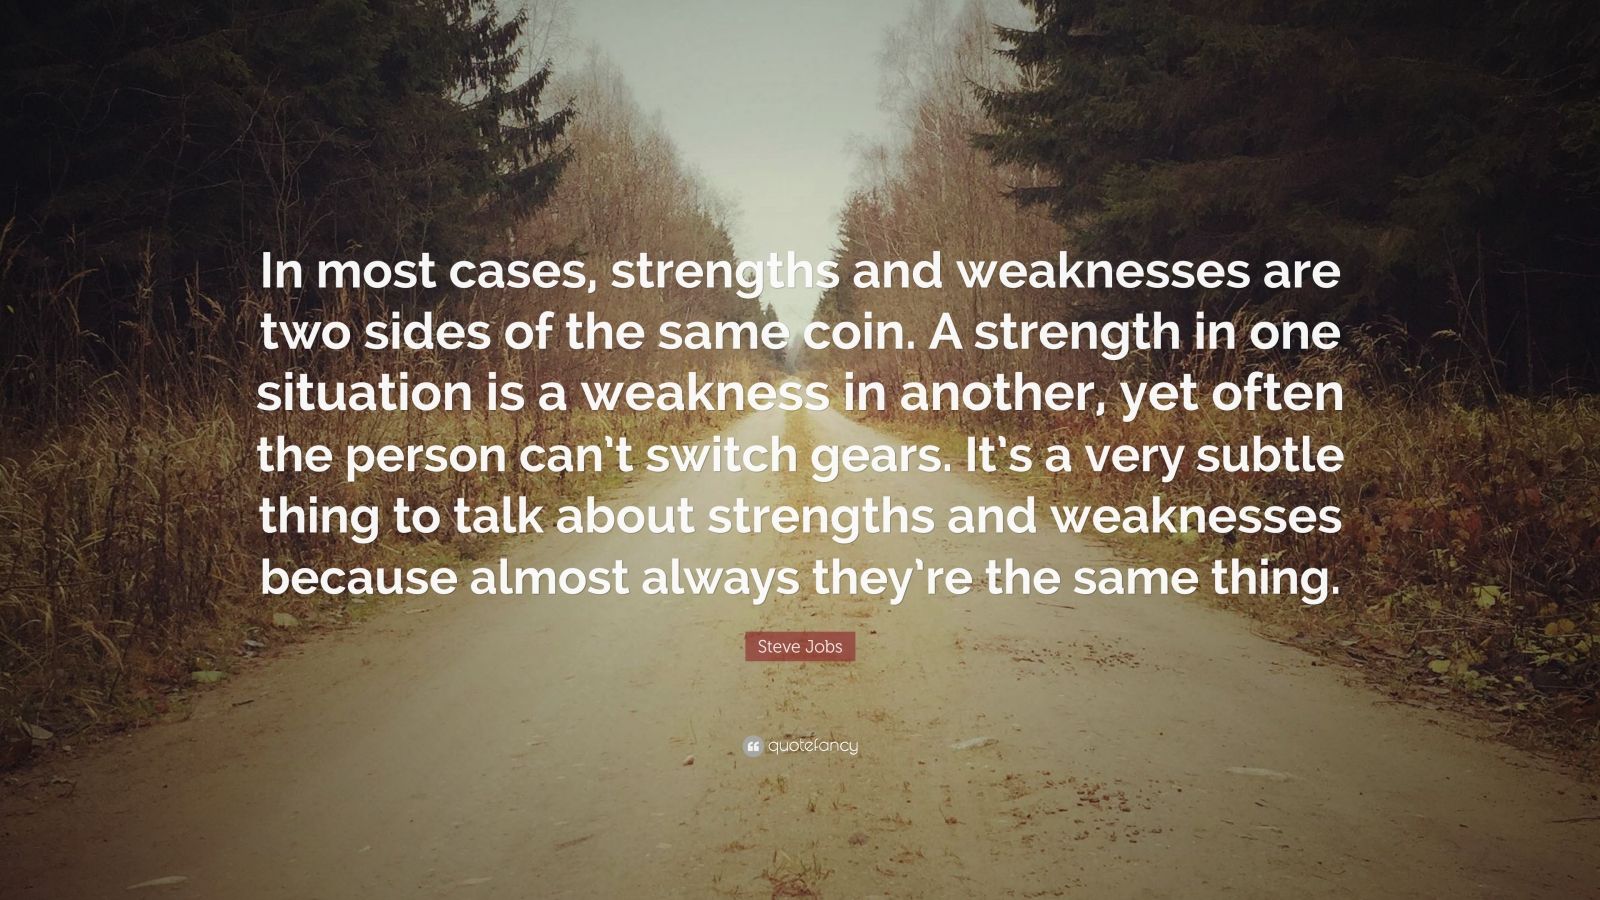 Steve Jobs Quote: “In most cases, strengths and weaknesses are two ...